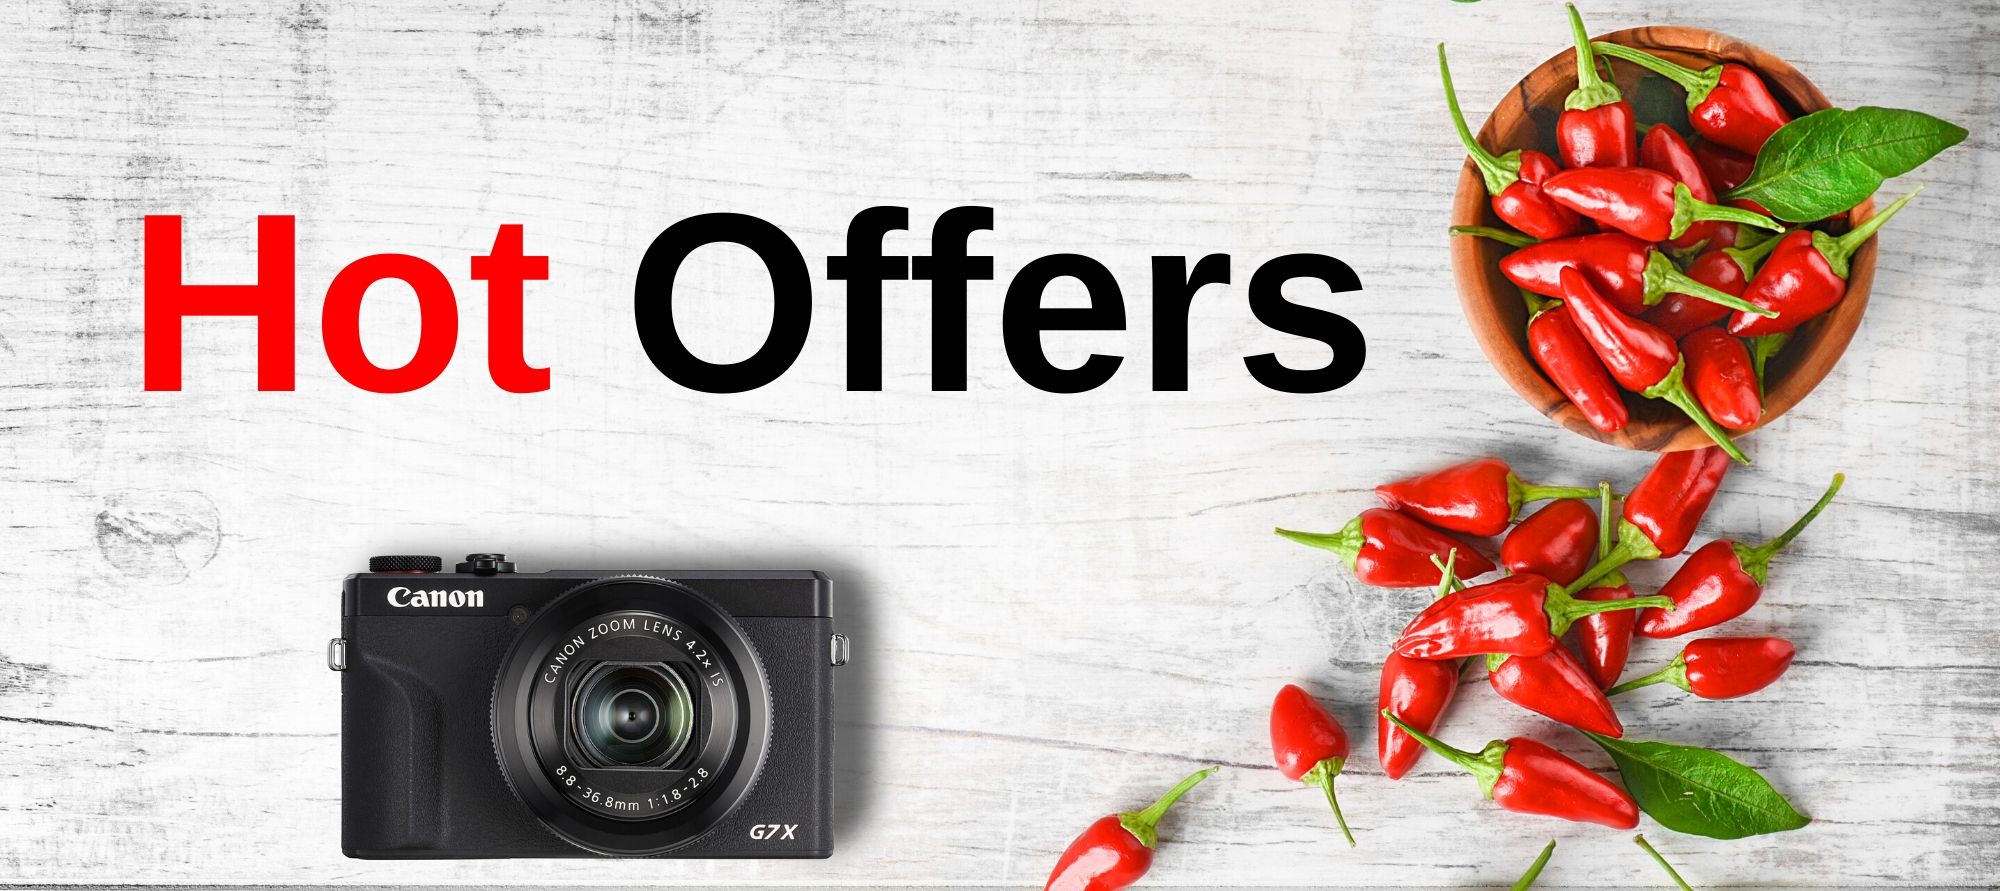 <h1 style="text-align: left;">Limited time Cameras, Camera Lenses and Accessories on Sale.<br>Camera deals constantly updated so keep checking back.</h1>
<p>These are DSLR, Mirorrless, Camera Lenses and Digital Compact Cameras that have been hand picked as special deals. Also check out our <a href="/black-friday-camera-sales">Black Friday Camera Sales here</a>. We ship express all around Australia from our digital camera warehouse overnight throughout Australia including Adelaide, Melbourne and Sydney and Perth.</p>